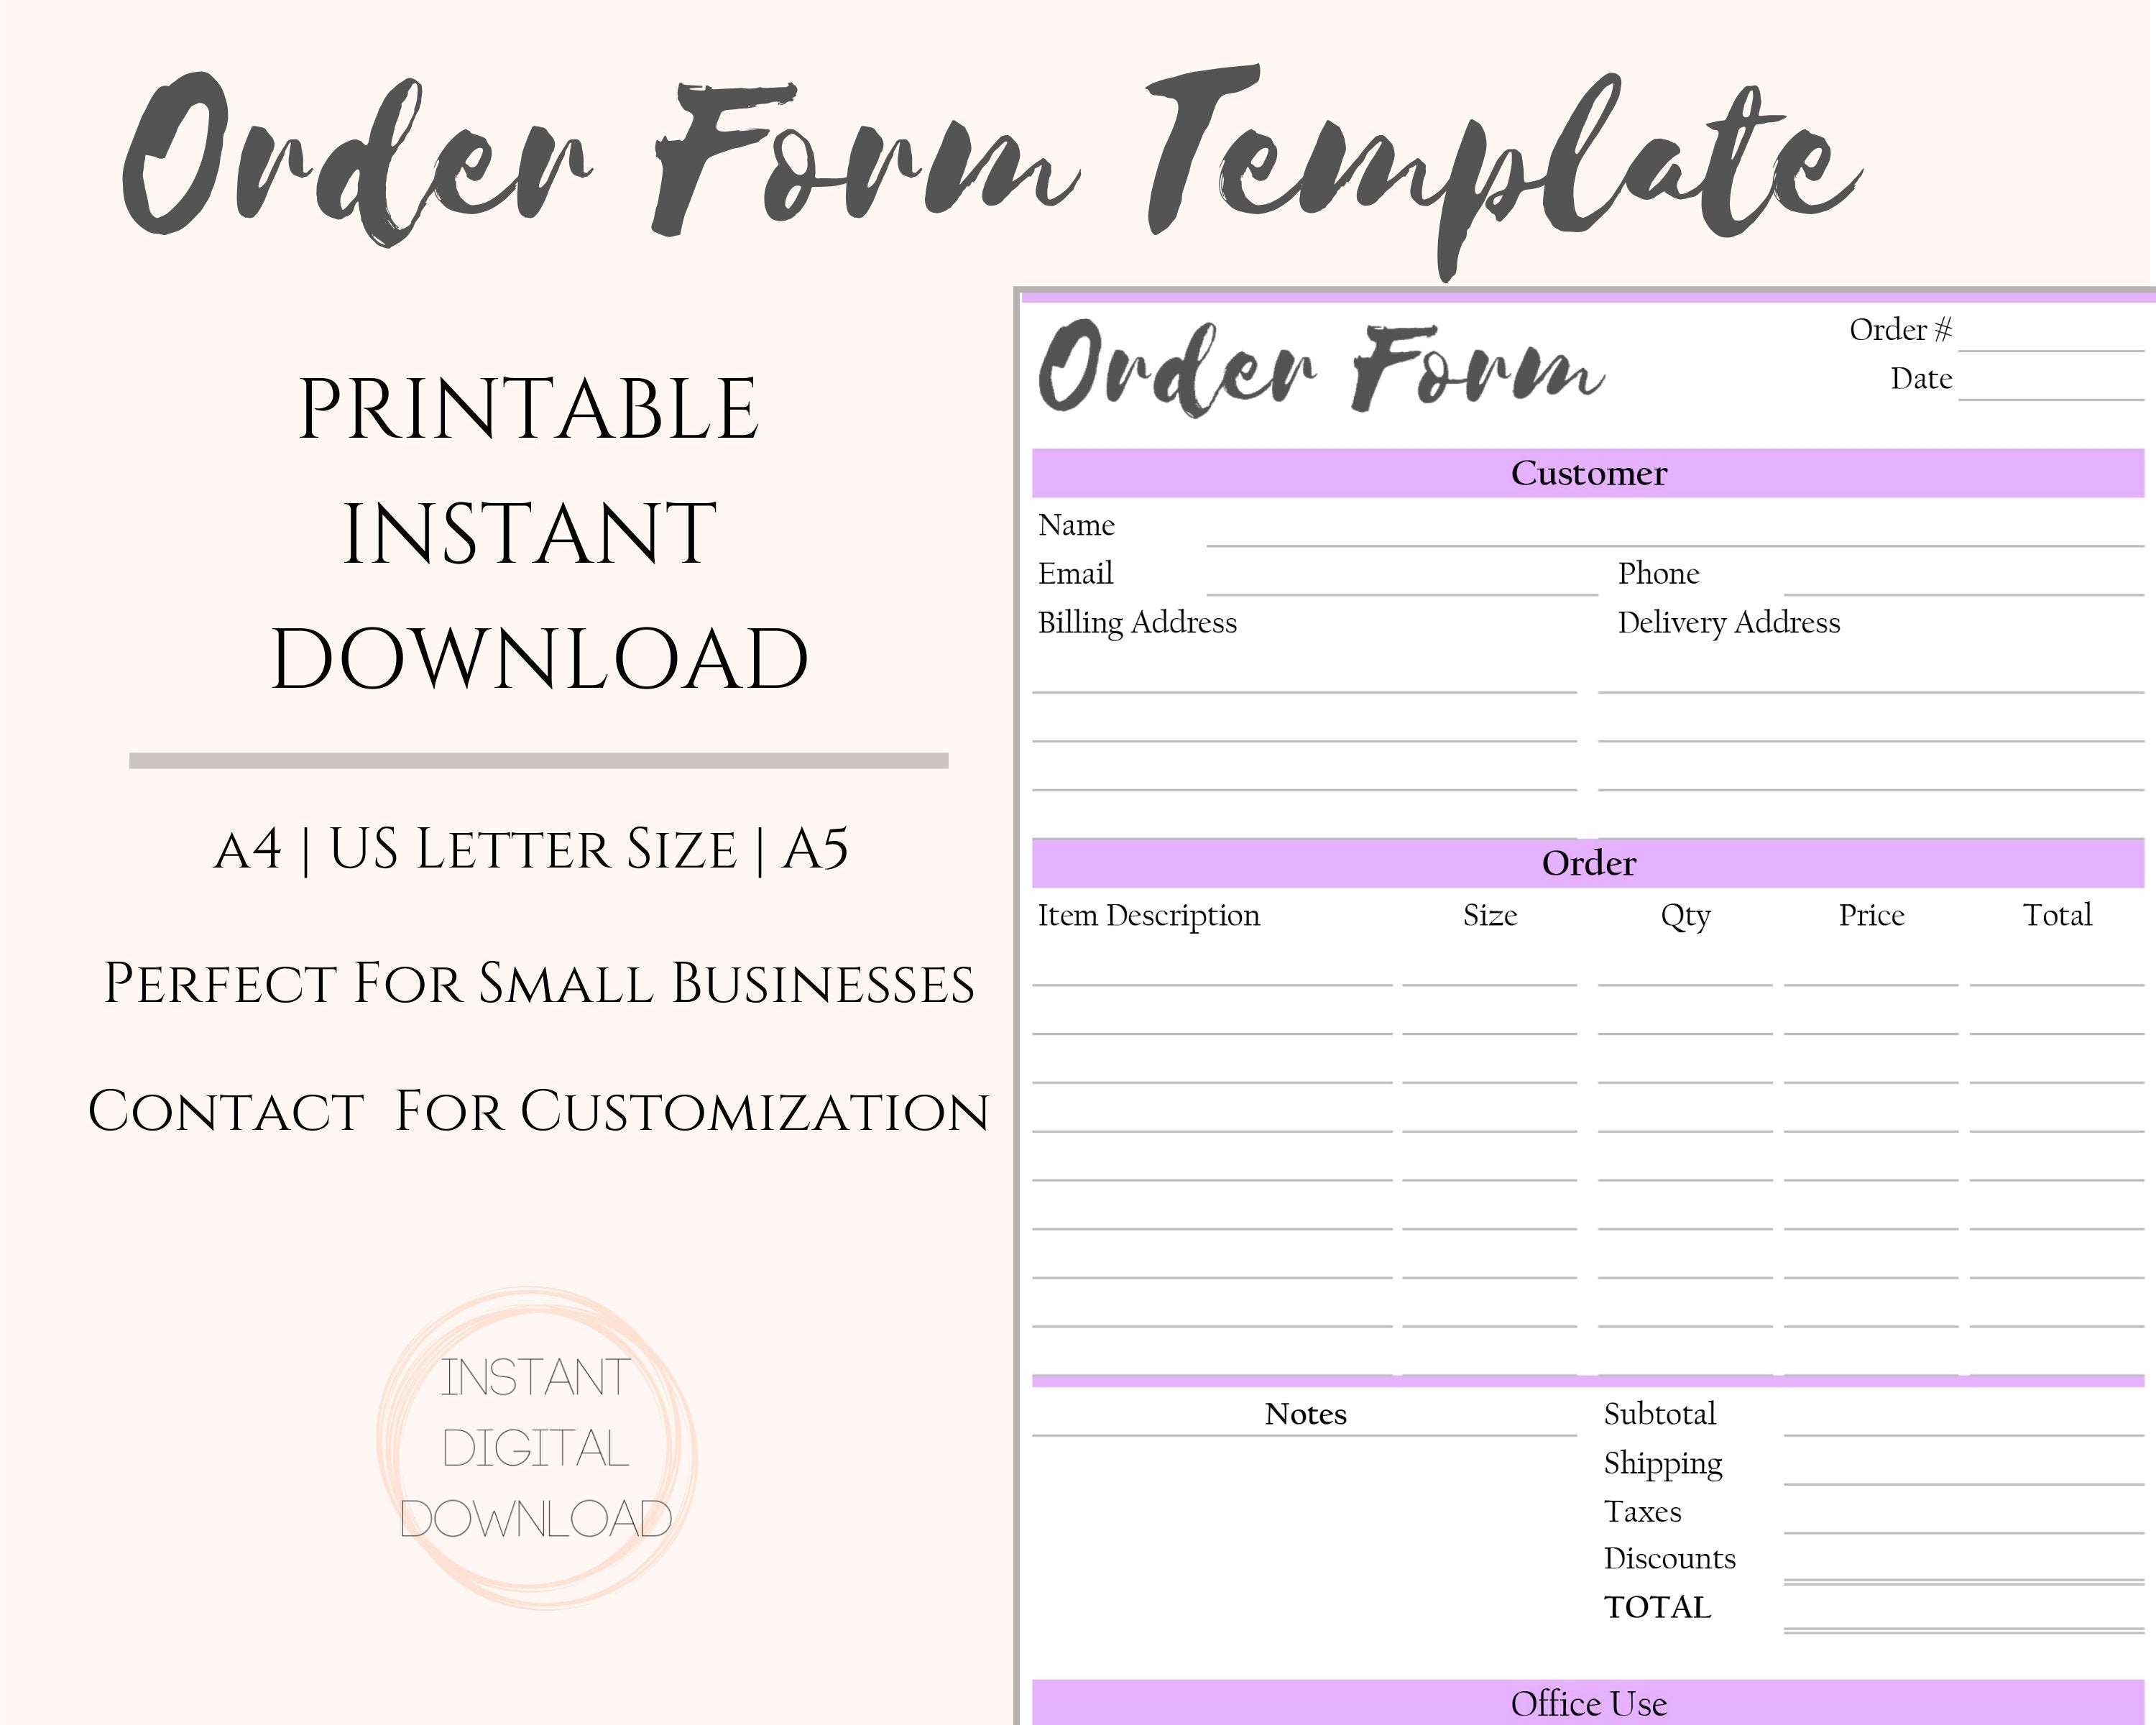 small business forms templates free